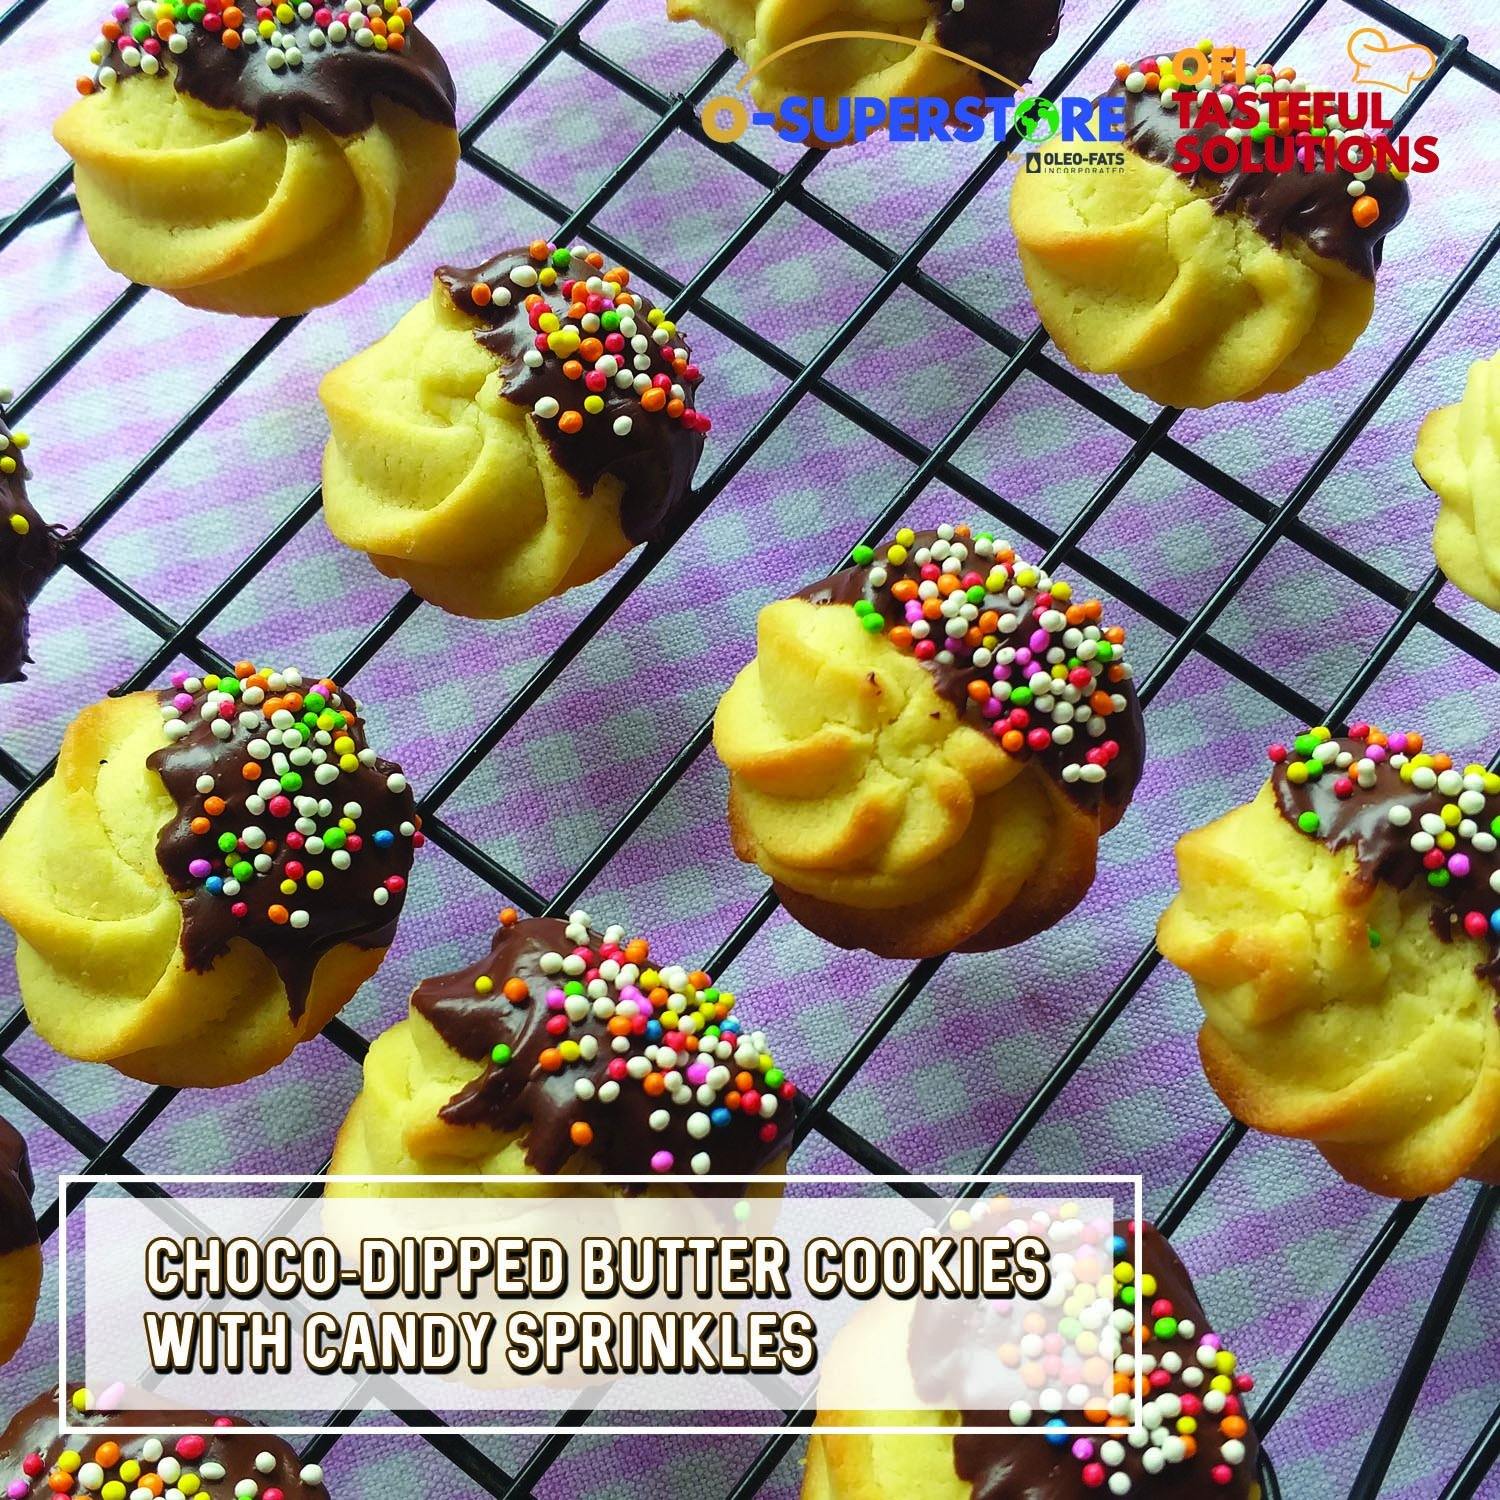 Choco-dipped Butter Cookies - O-SUPERSTORE